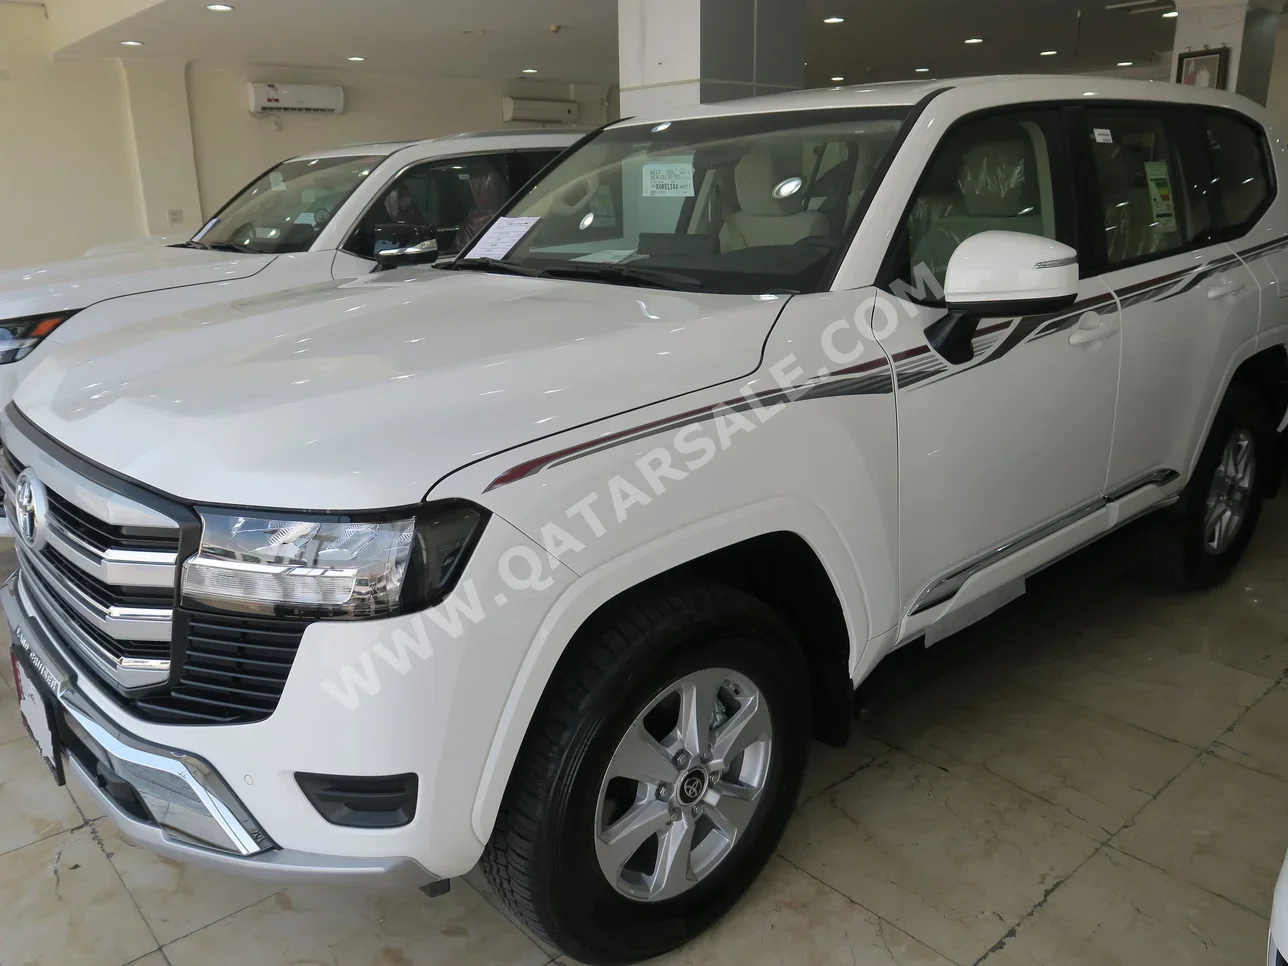  Toyota  Land Cruiser  GXR  2024  Automatic  0 Km  6 Cylinder  Four Wheel Drive (4WD)  SUV  White  With Warranty